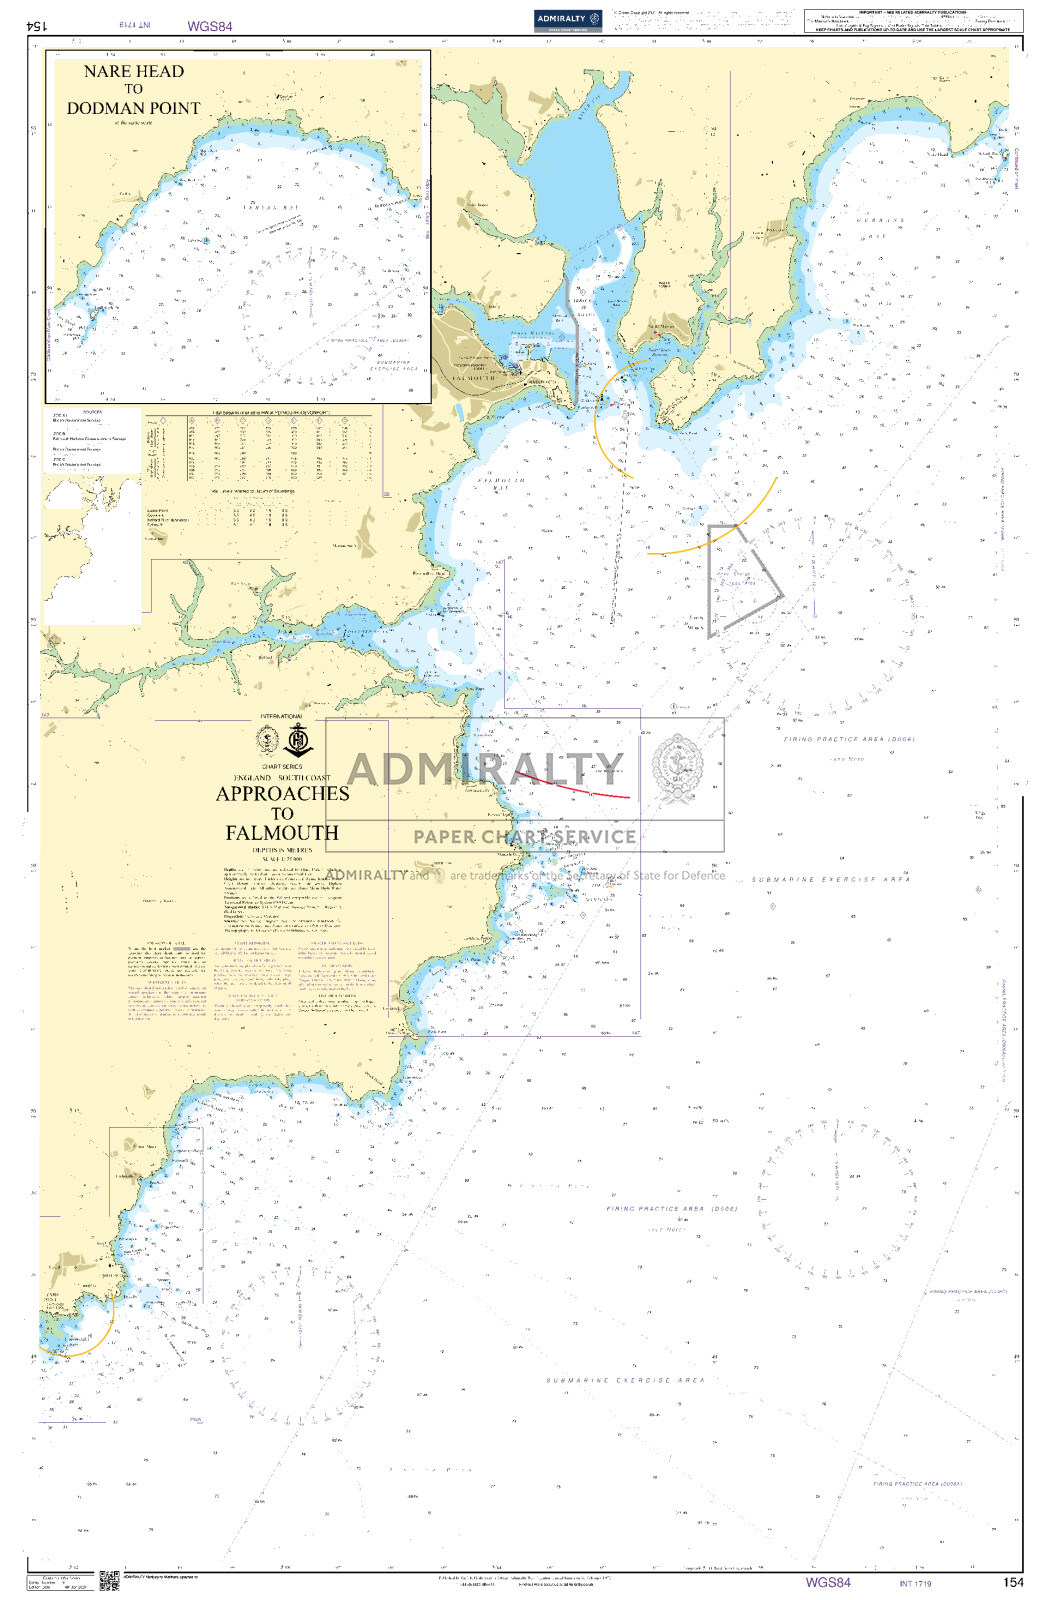 Approaches to Falmouth. UKHO154